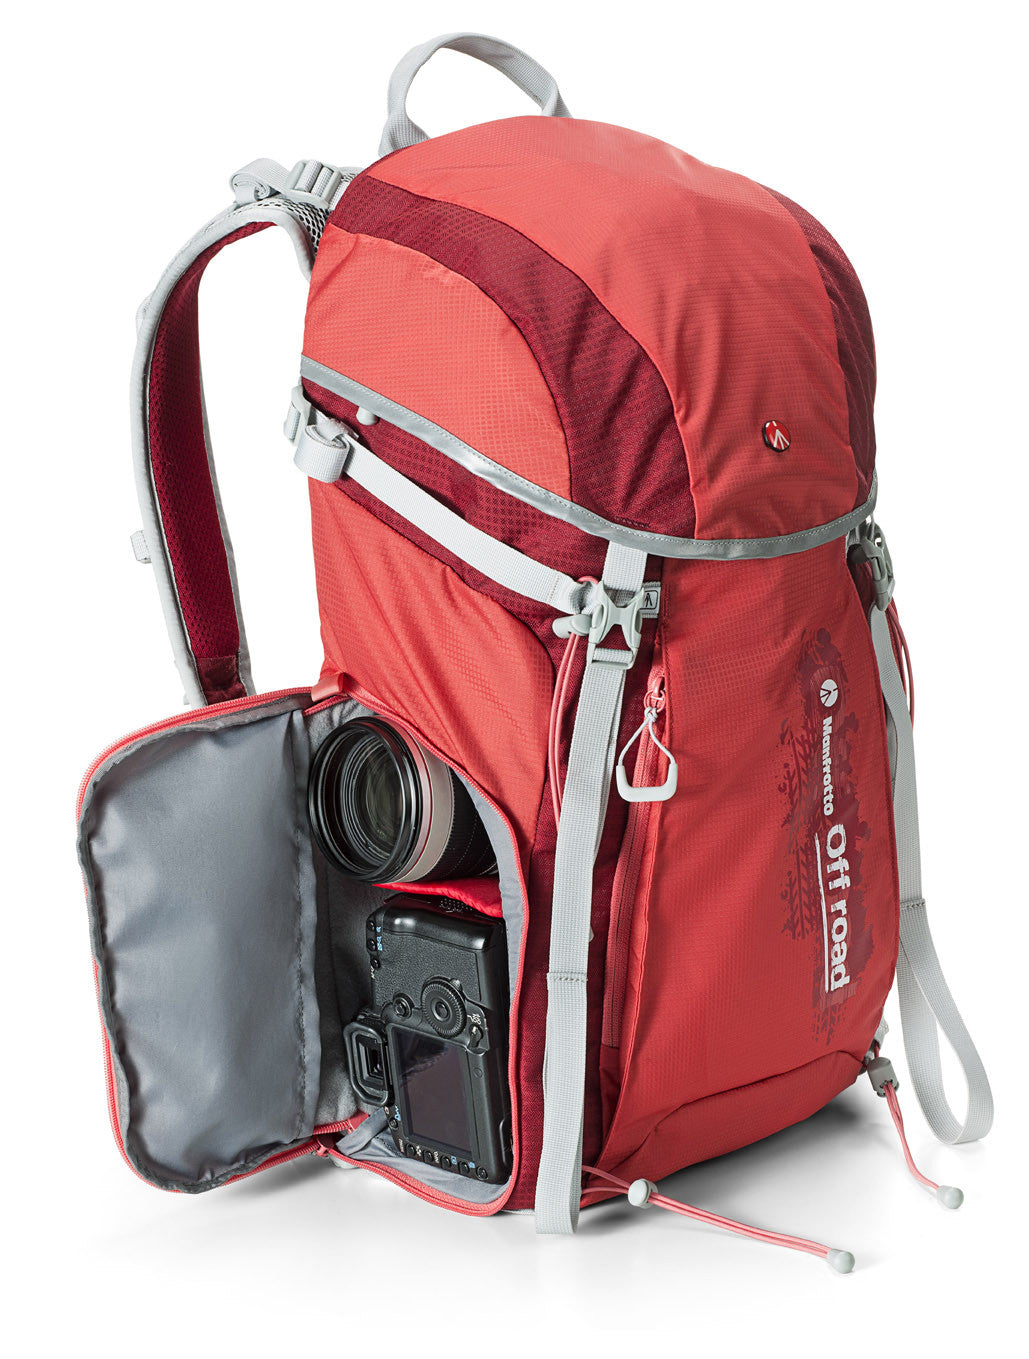 Manfrotto Off Road Hiking Backpack Grey, bags backpacks, Manfrotto - Pictureline  - 6